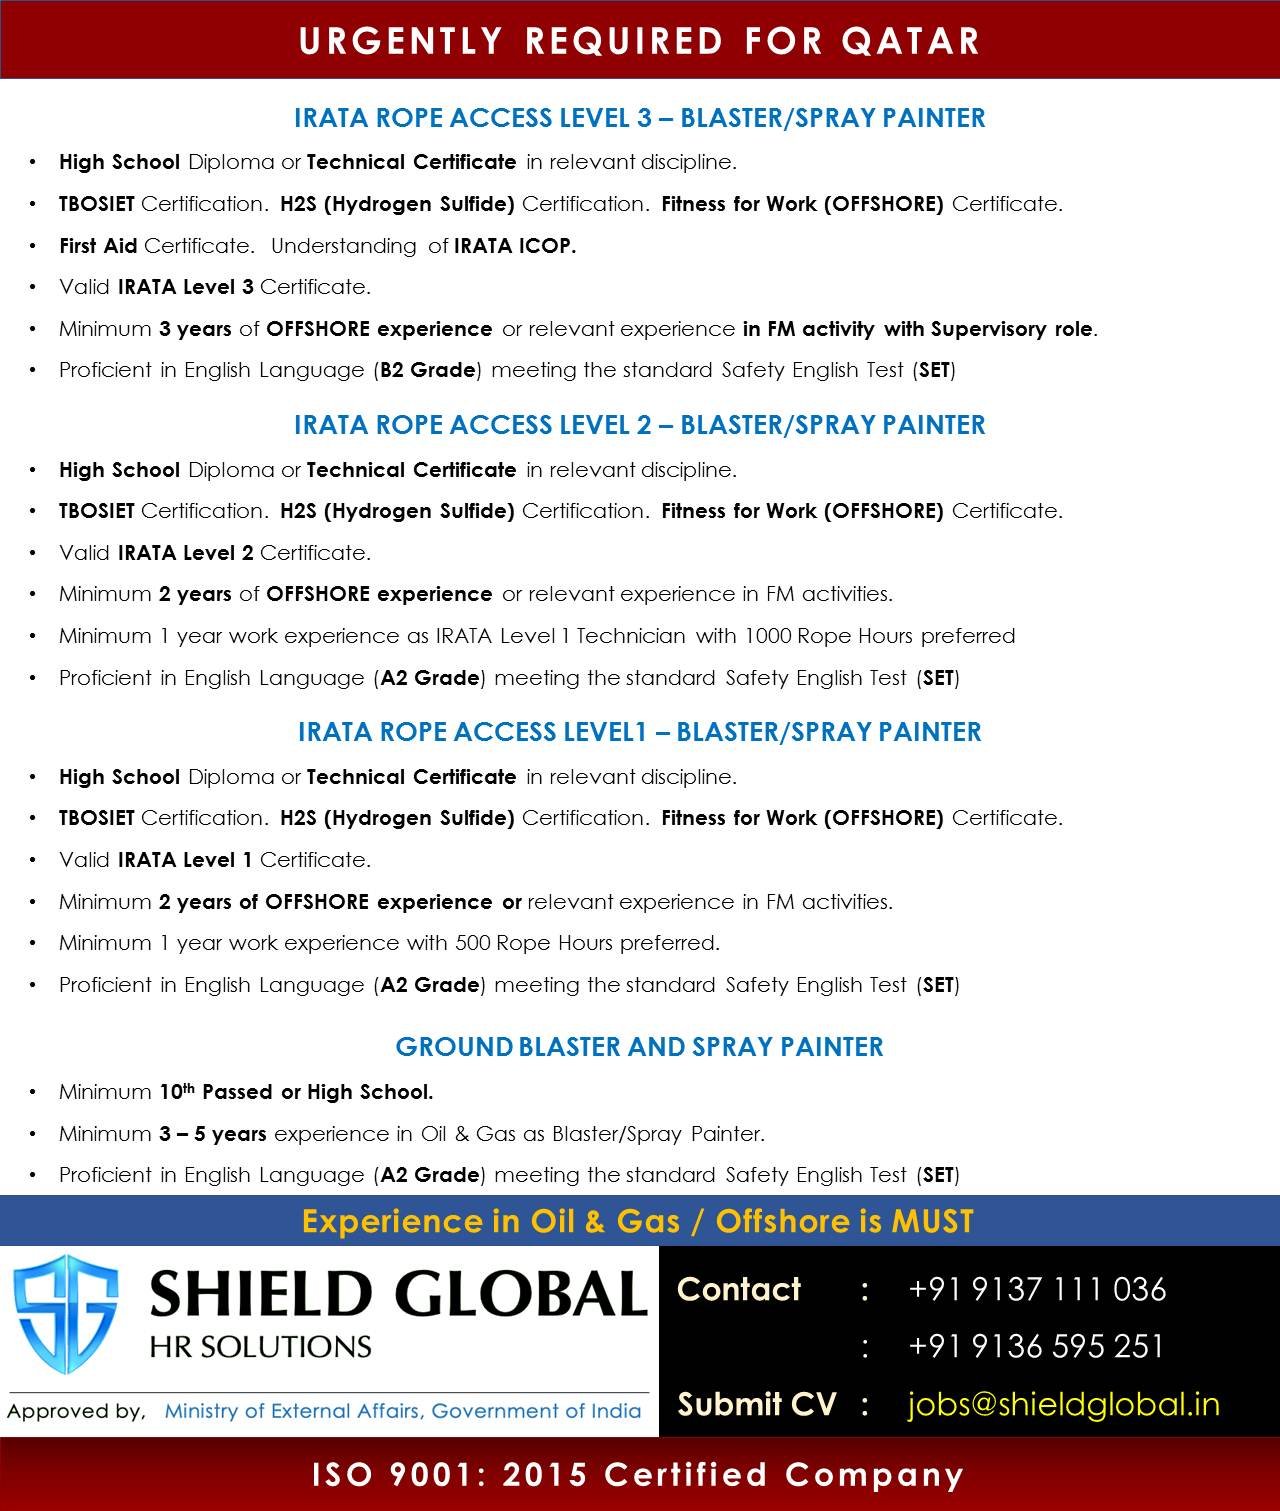 SHIELD GLOBAL HR SOLUTIONS #SHIELD #GLOBAL #SOLUTIONS